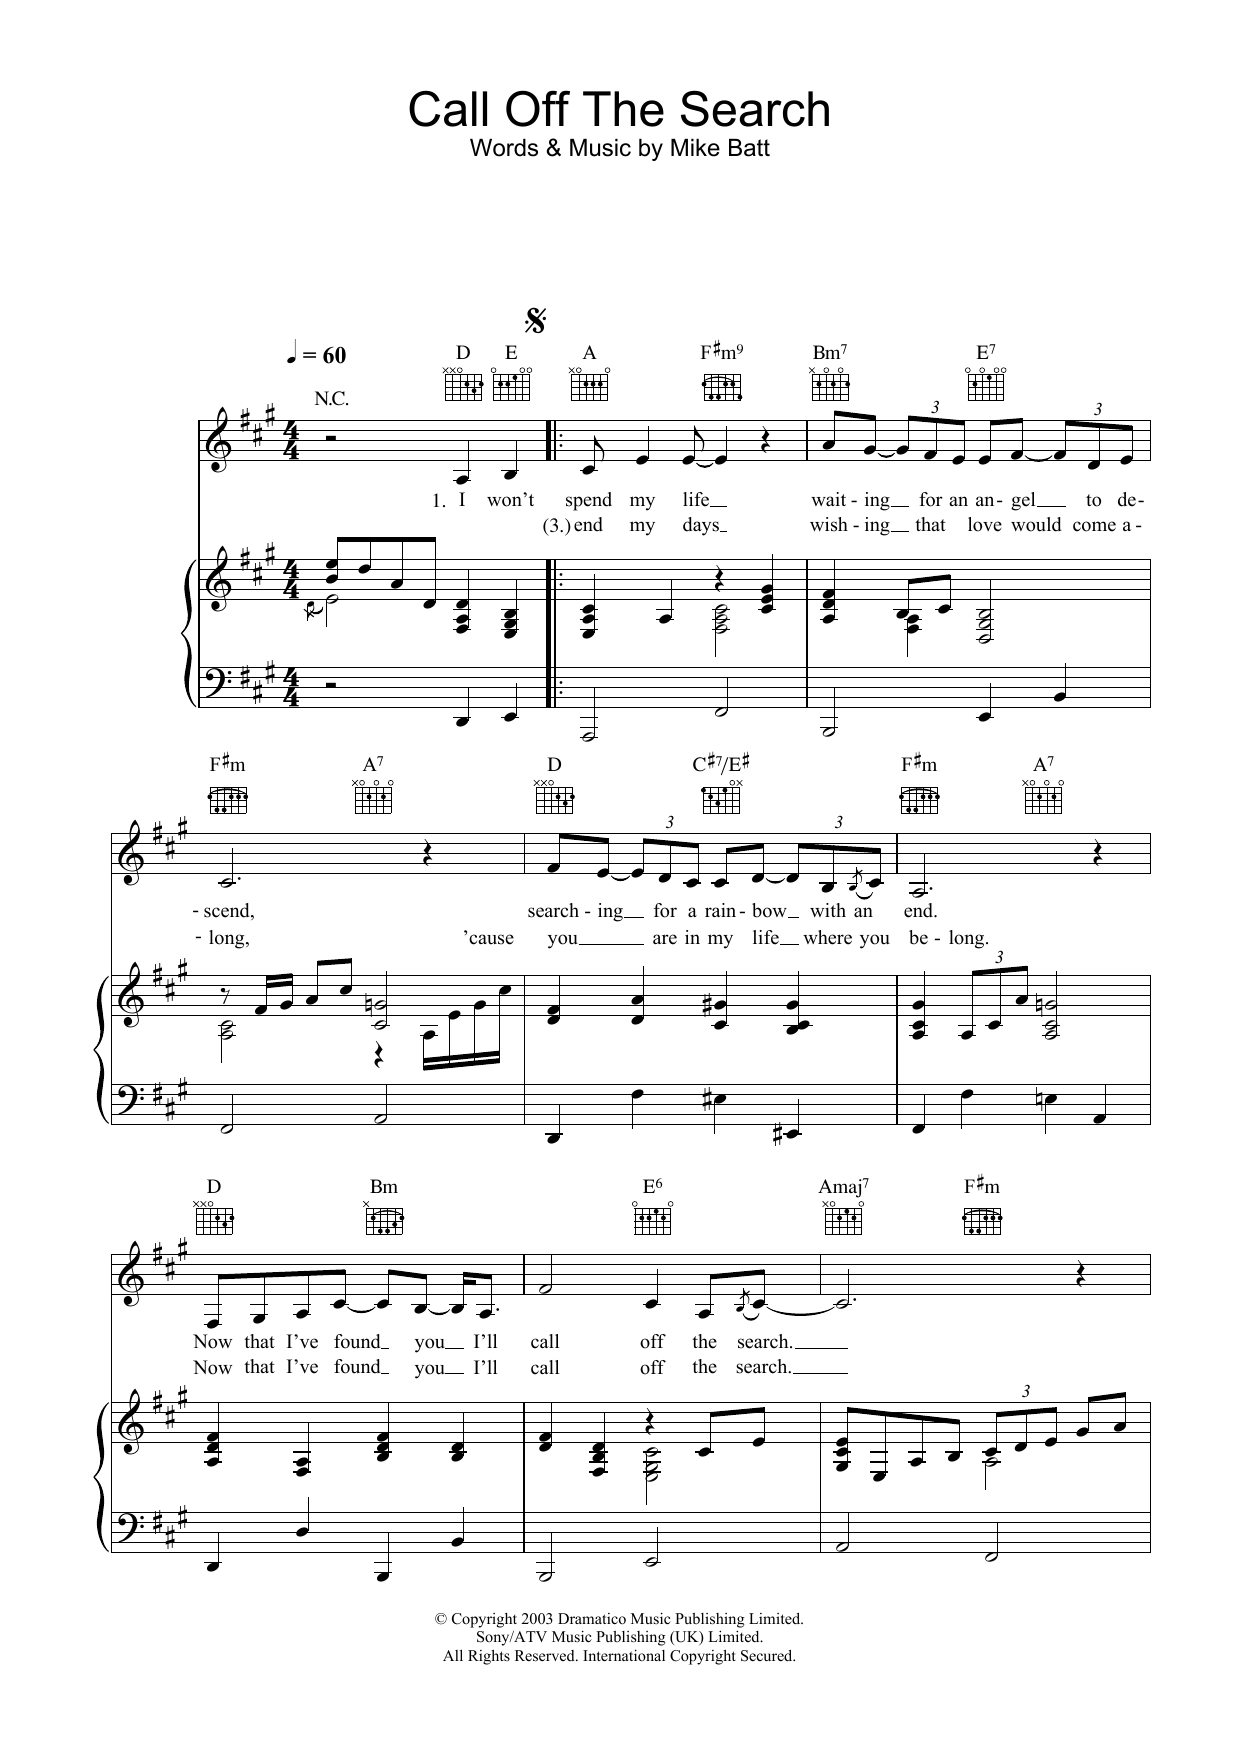 Katie Melua Call Off The Search sheet music notes and chords. Download Printable PDF.